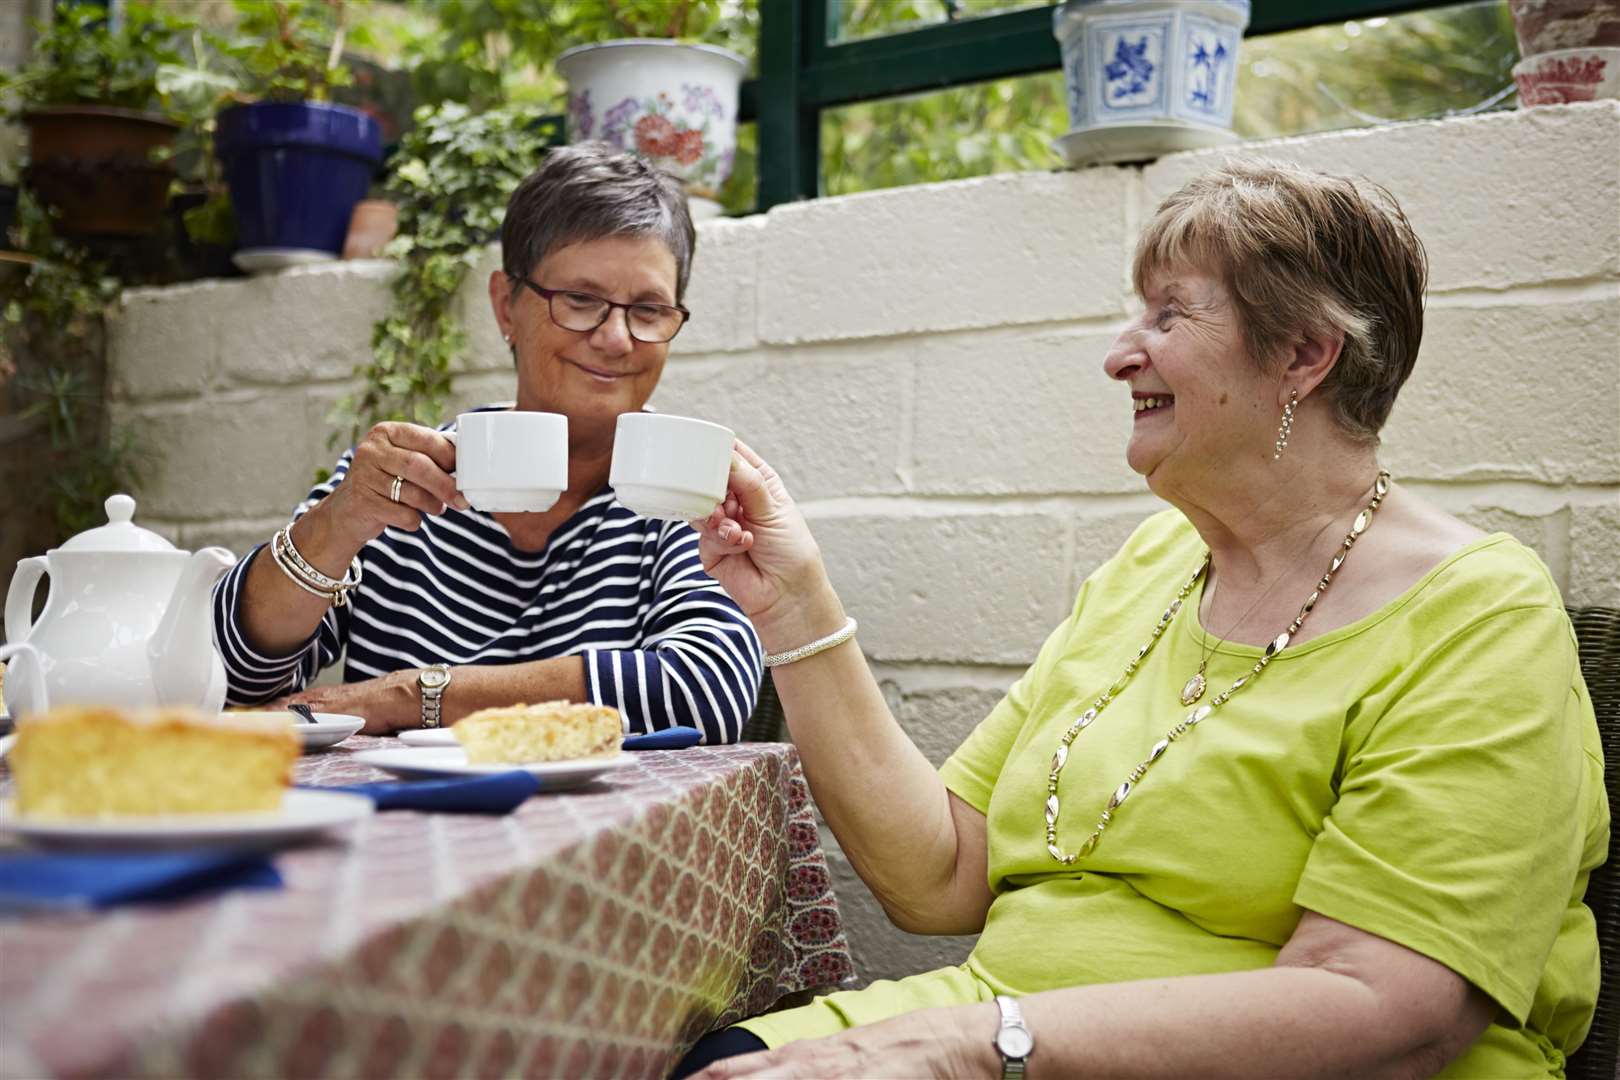 The Alzheimer's Society is calling on the government to deliver on their promise of social care reform. Picture: Alzheimer's Society